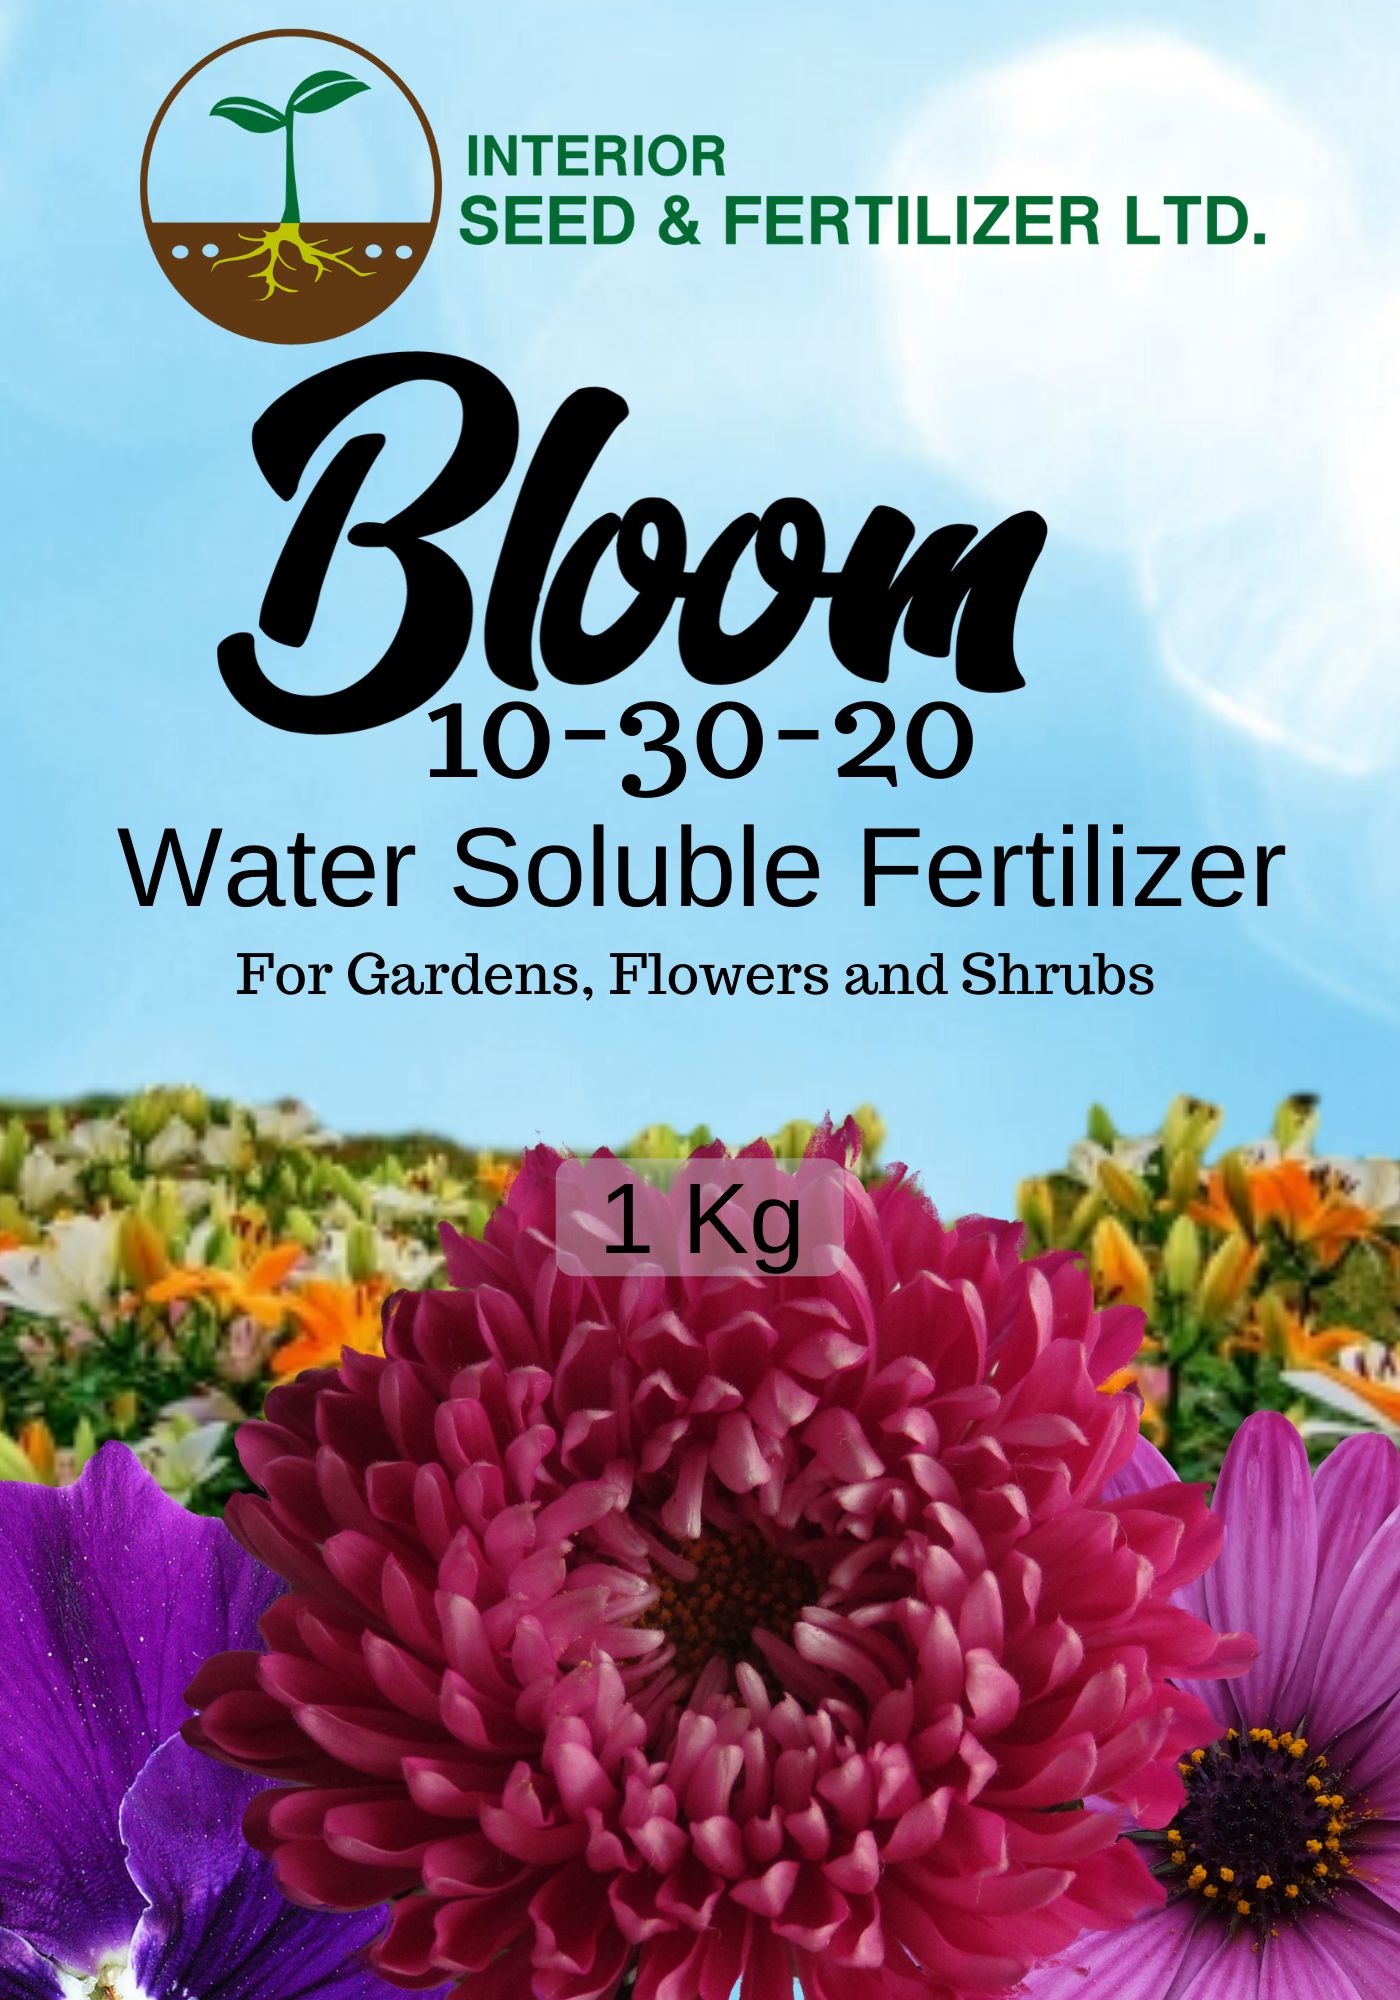 "Bloom" Water Soluble Fertilizer for Gardens, Flowers and Shrubs, at Interior Seed and Fertilizer Garden Center Cranbrook, BC 10-30-20